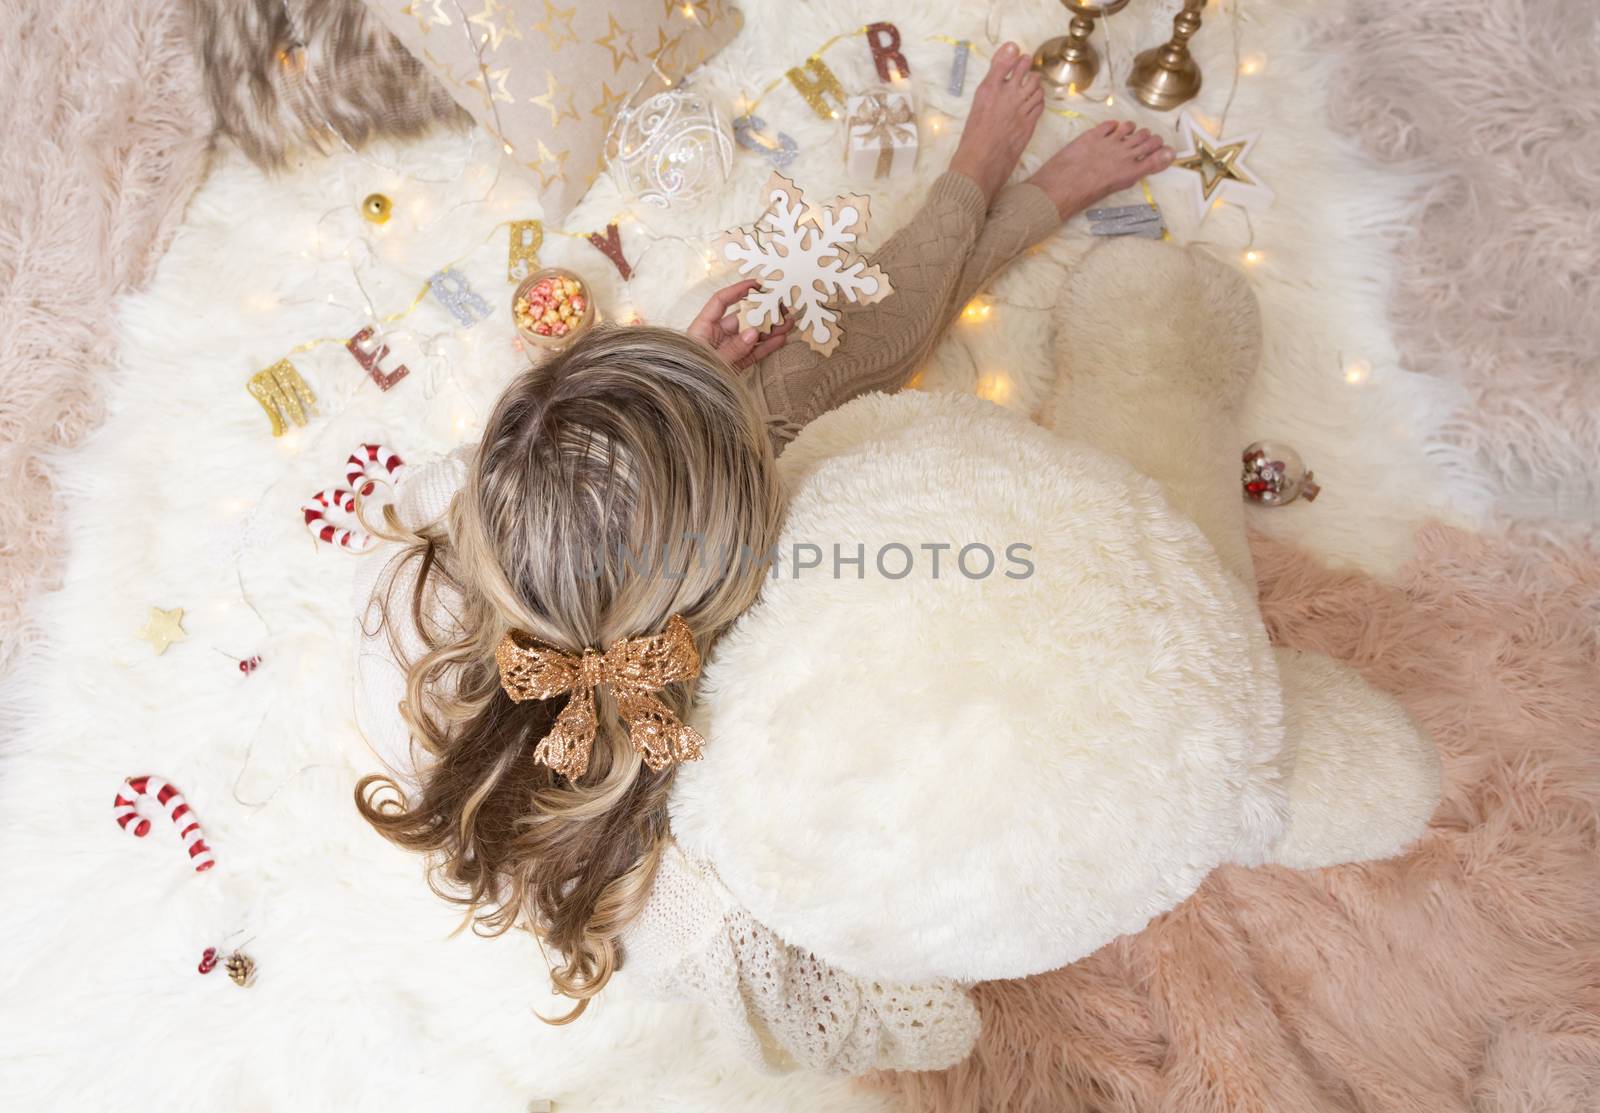 A woman sits among Christmas decorations.  She is holding a snowflake ornament for the Christmas tree